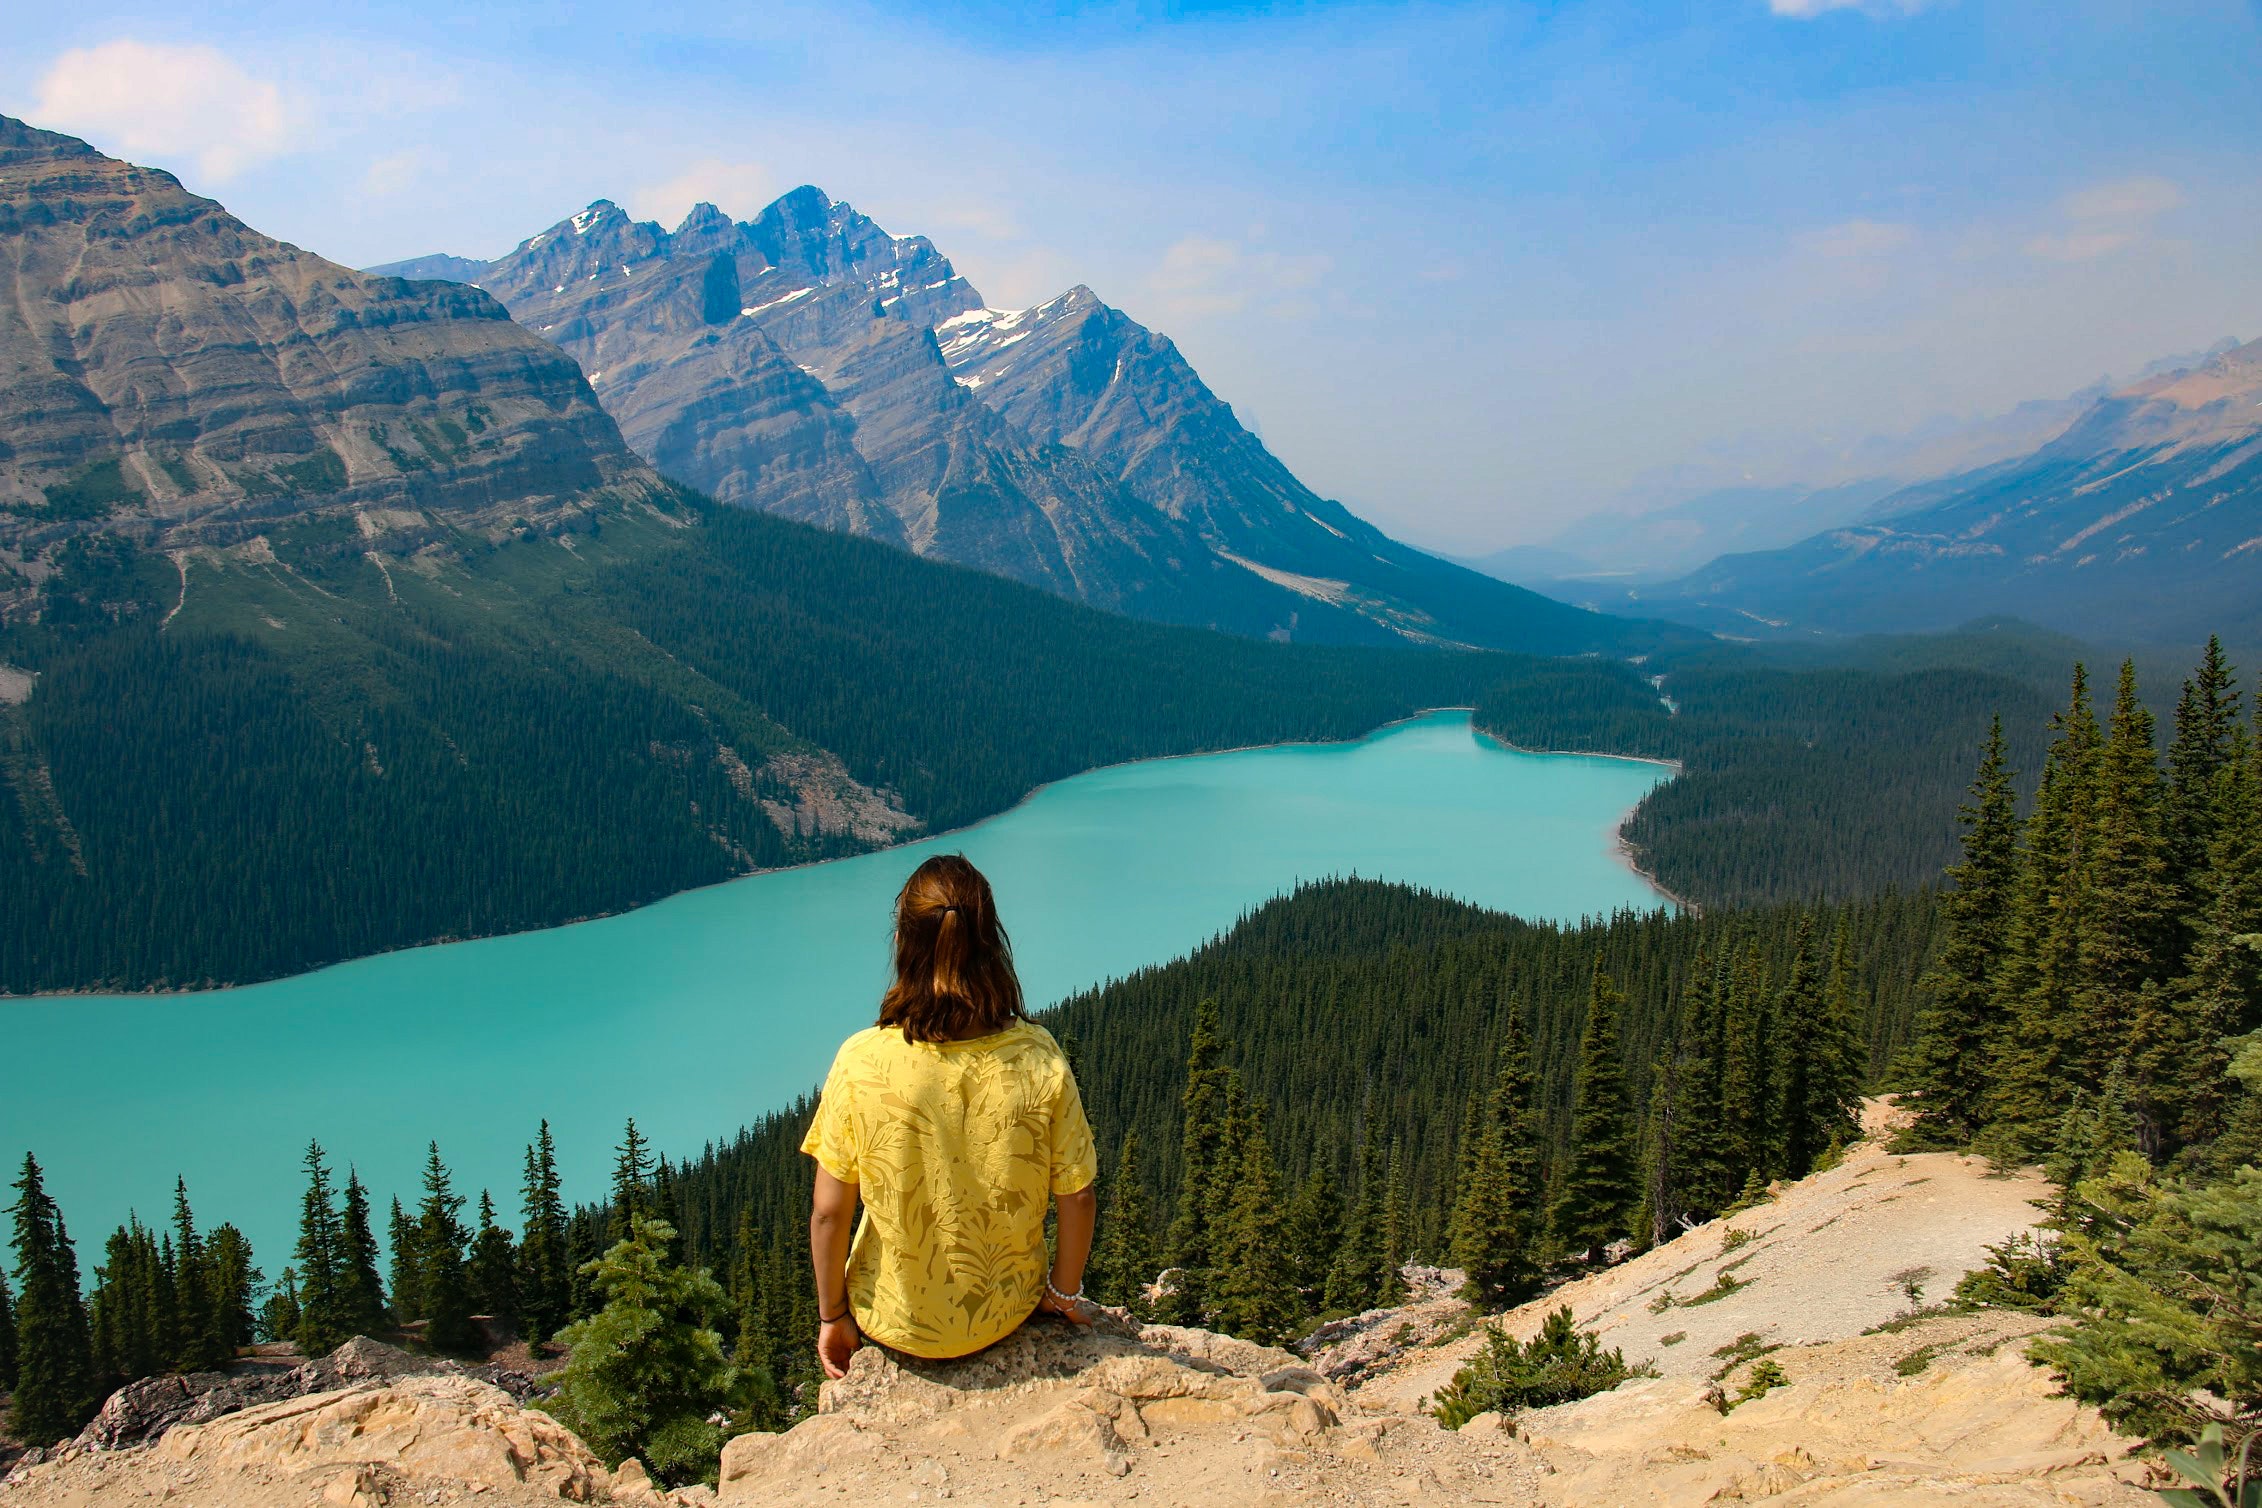 Person sitting on rocky mountain near body of water photo